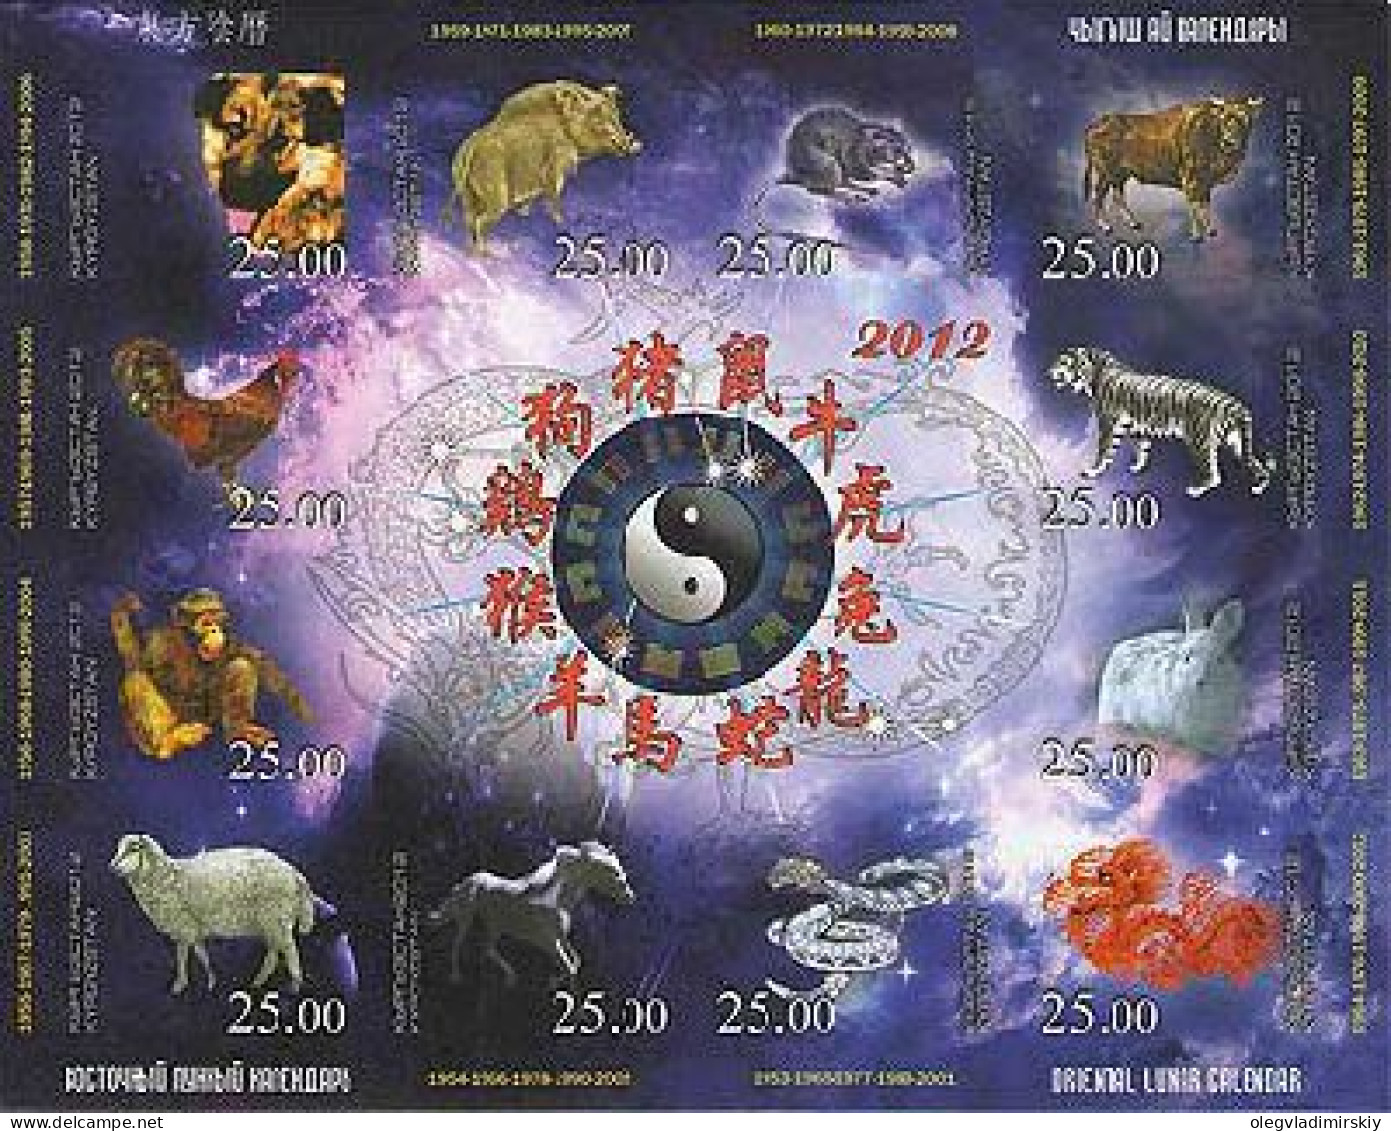 Kyrgyzstan 2012 Lunar Chinese Calendar Horoscope All Zodiac Signs RARE IMPERFORETED Block \ Sheetlet MNH - Chinese New Year